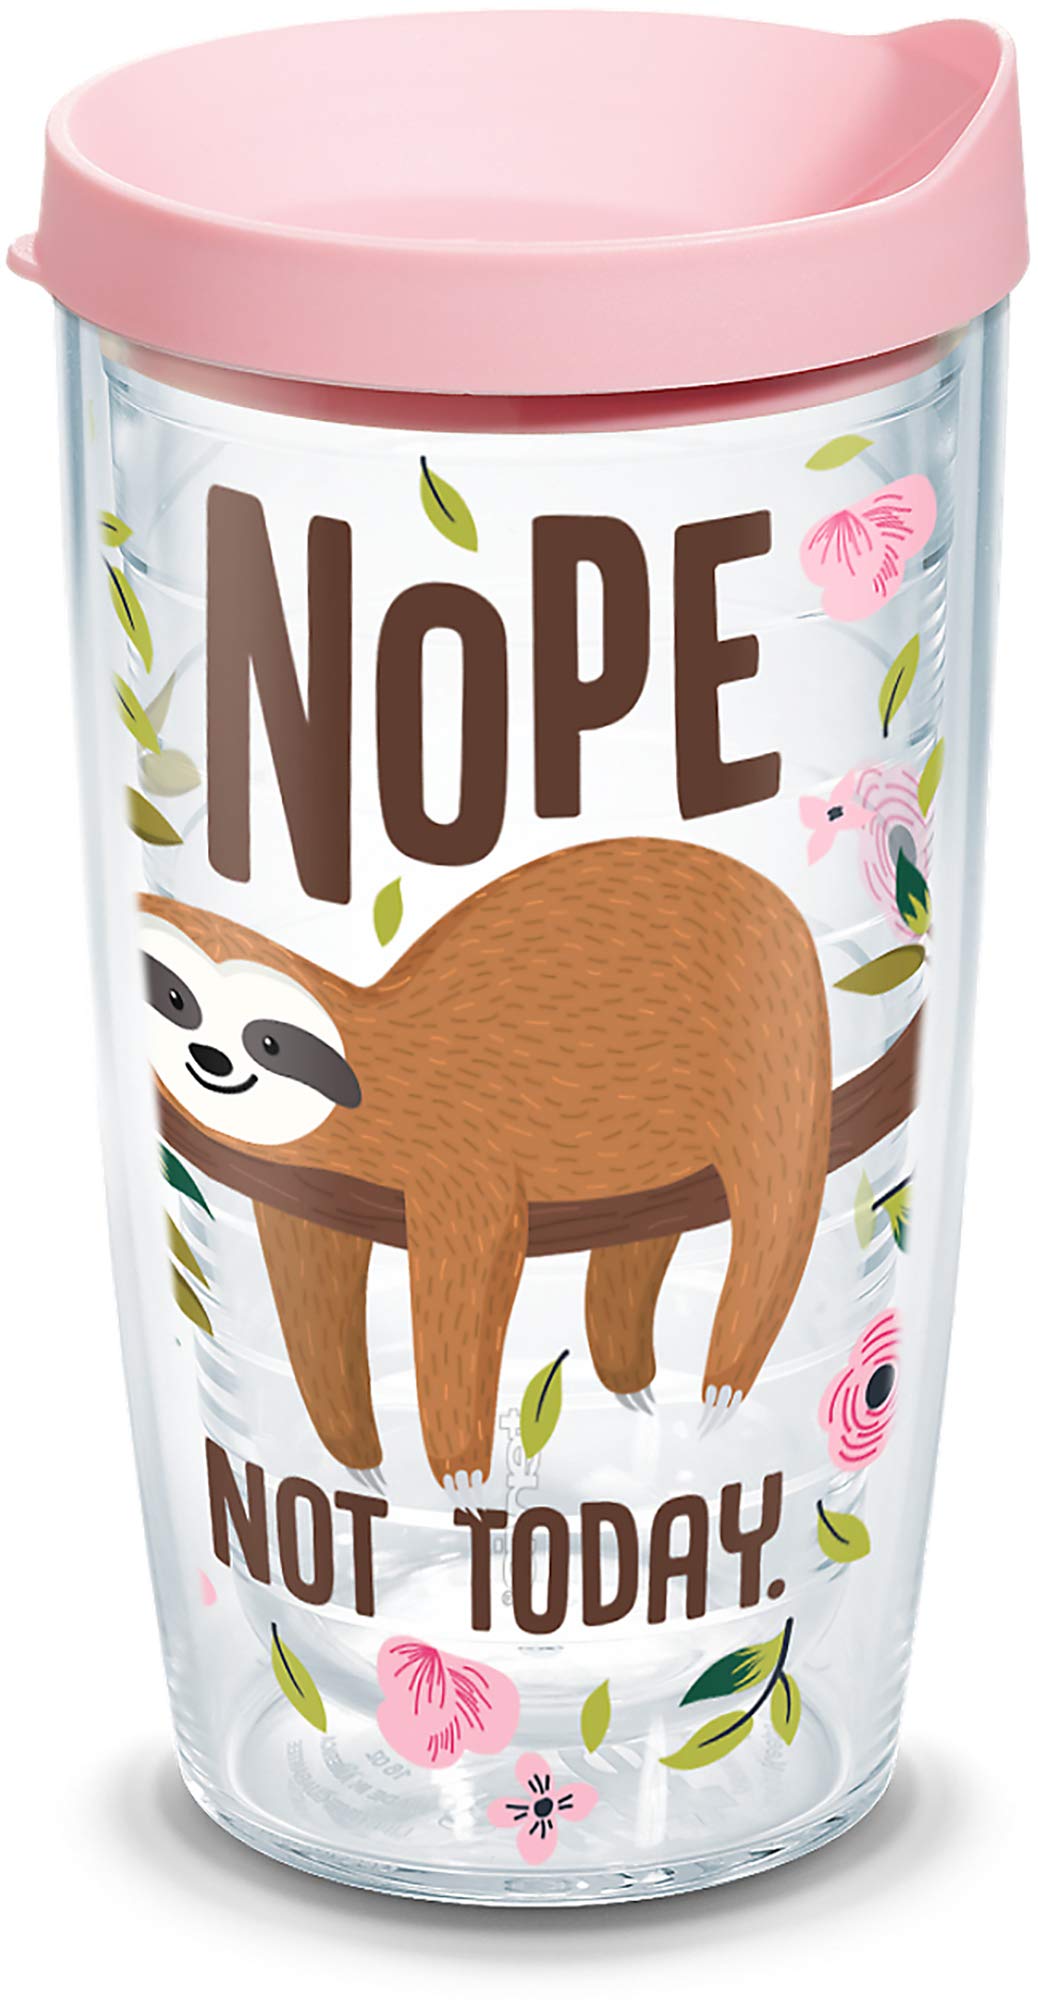 Book Cover Tervis Sloth Nope Not Today Made in USA Double Walled Insulated Tumbler Travel Cup Keeps Drinks Cold & Hot, 16oz, Classic Classic 16oz